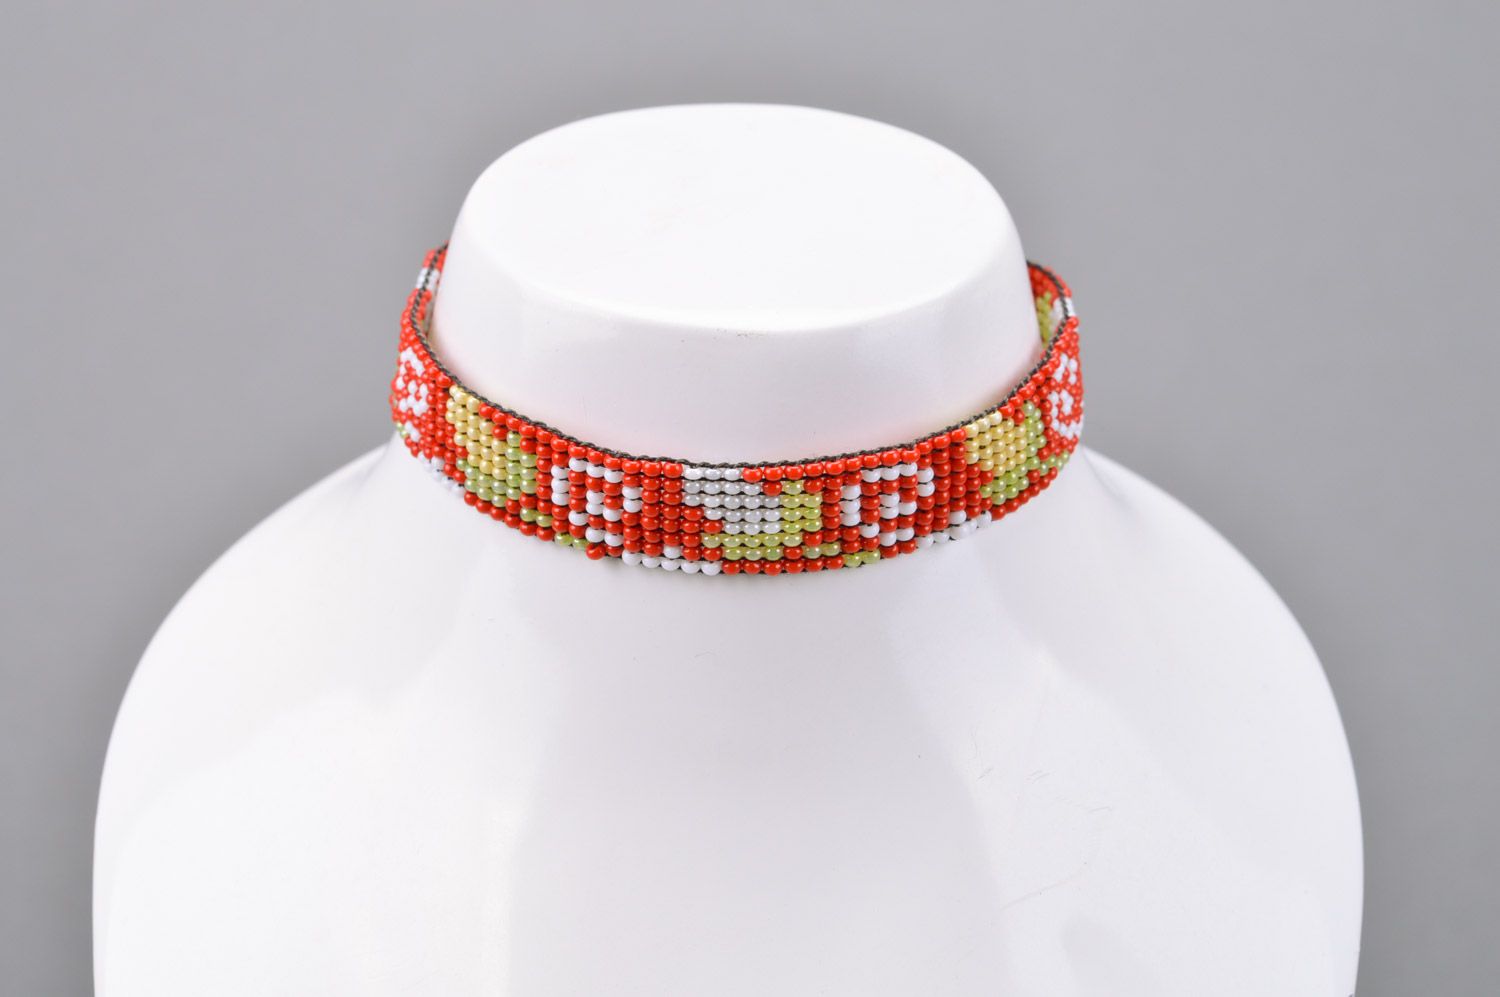 Handmade red bead woven necklace with ties and floral ornaments for women photo 1